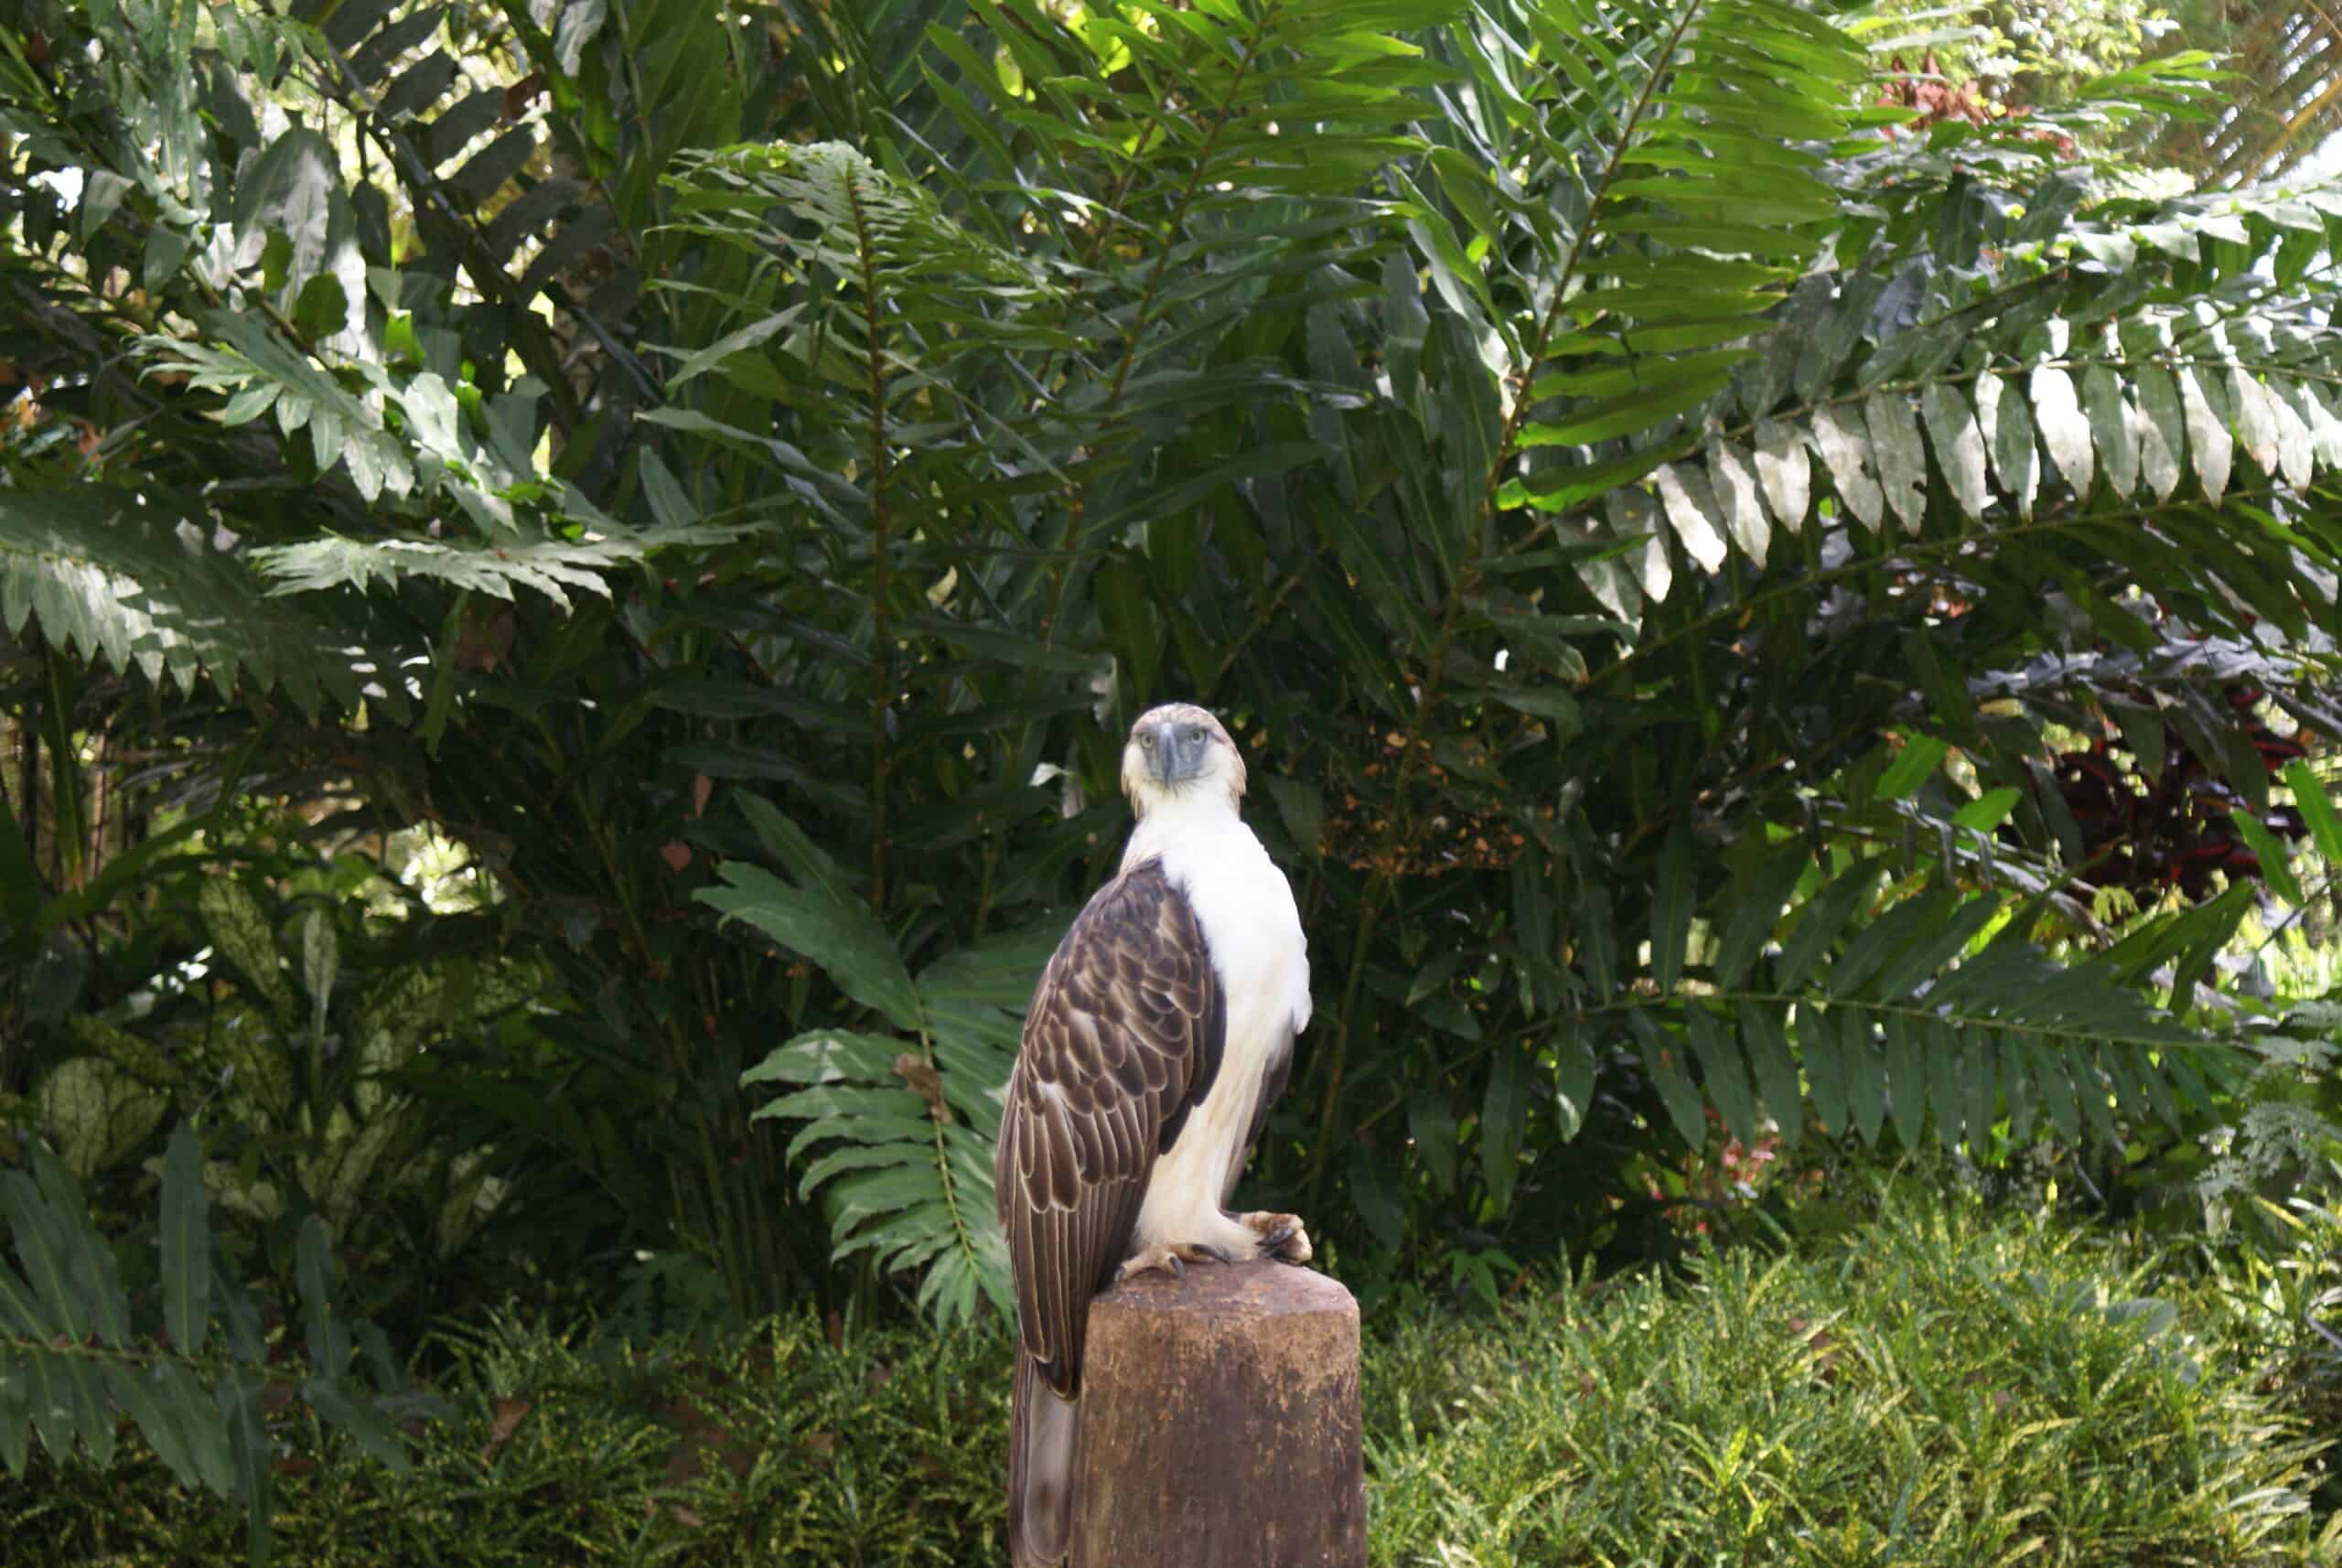 Majestic Philippine Eagle, an endangered species of bird, perched on a branch in its natural habitat